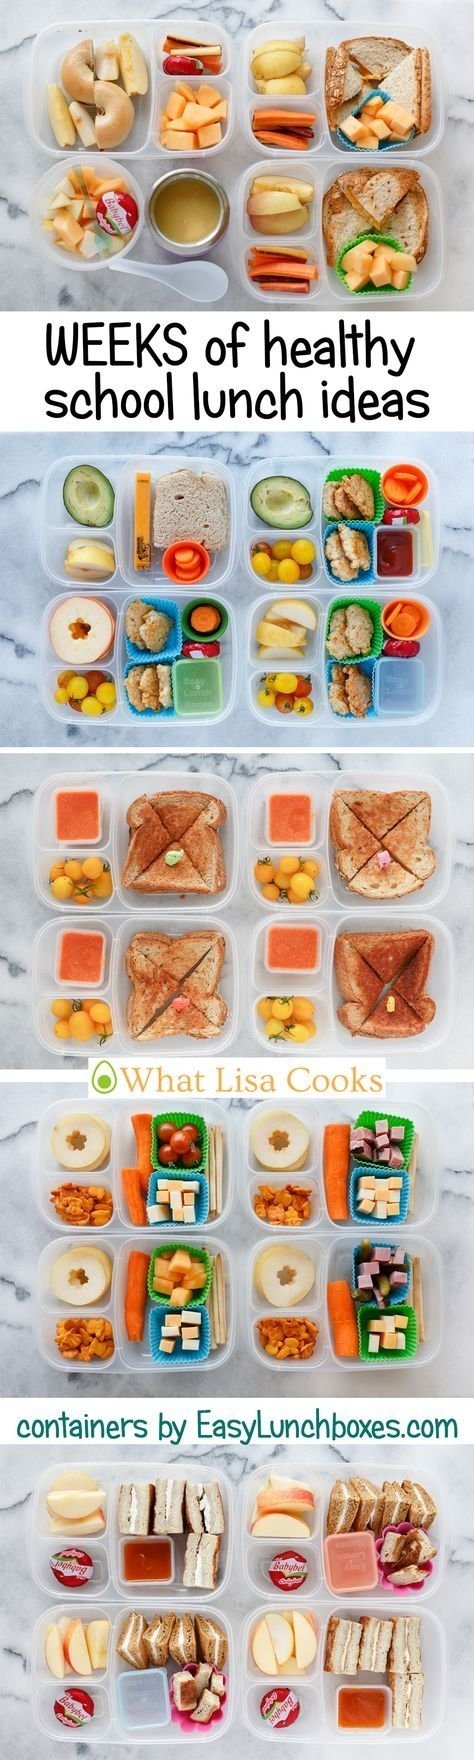 10 Attractive Cheap Lunch Ideas For Kids 68 best lunch box ideas images on pinterest toddler lunches 2 2022